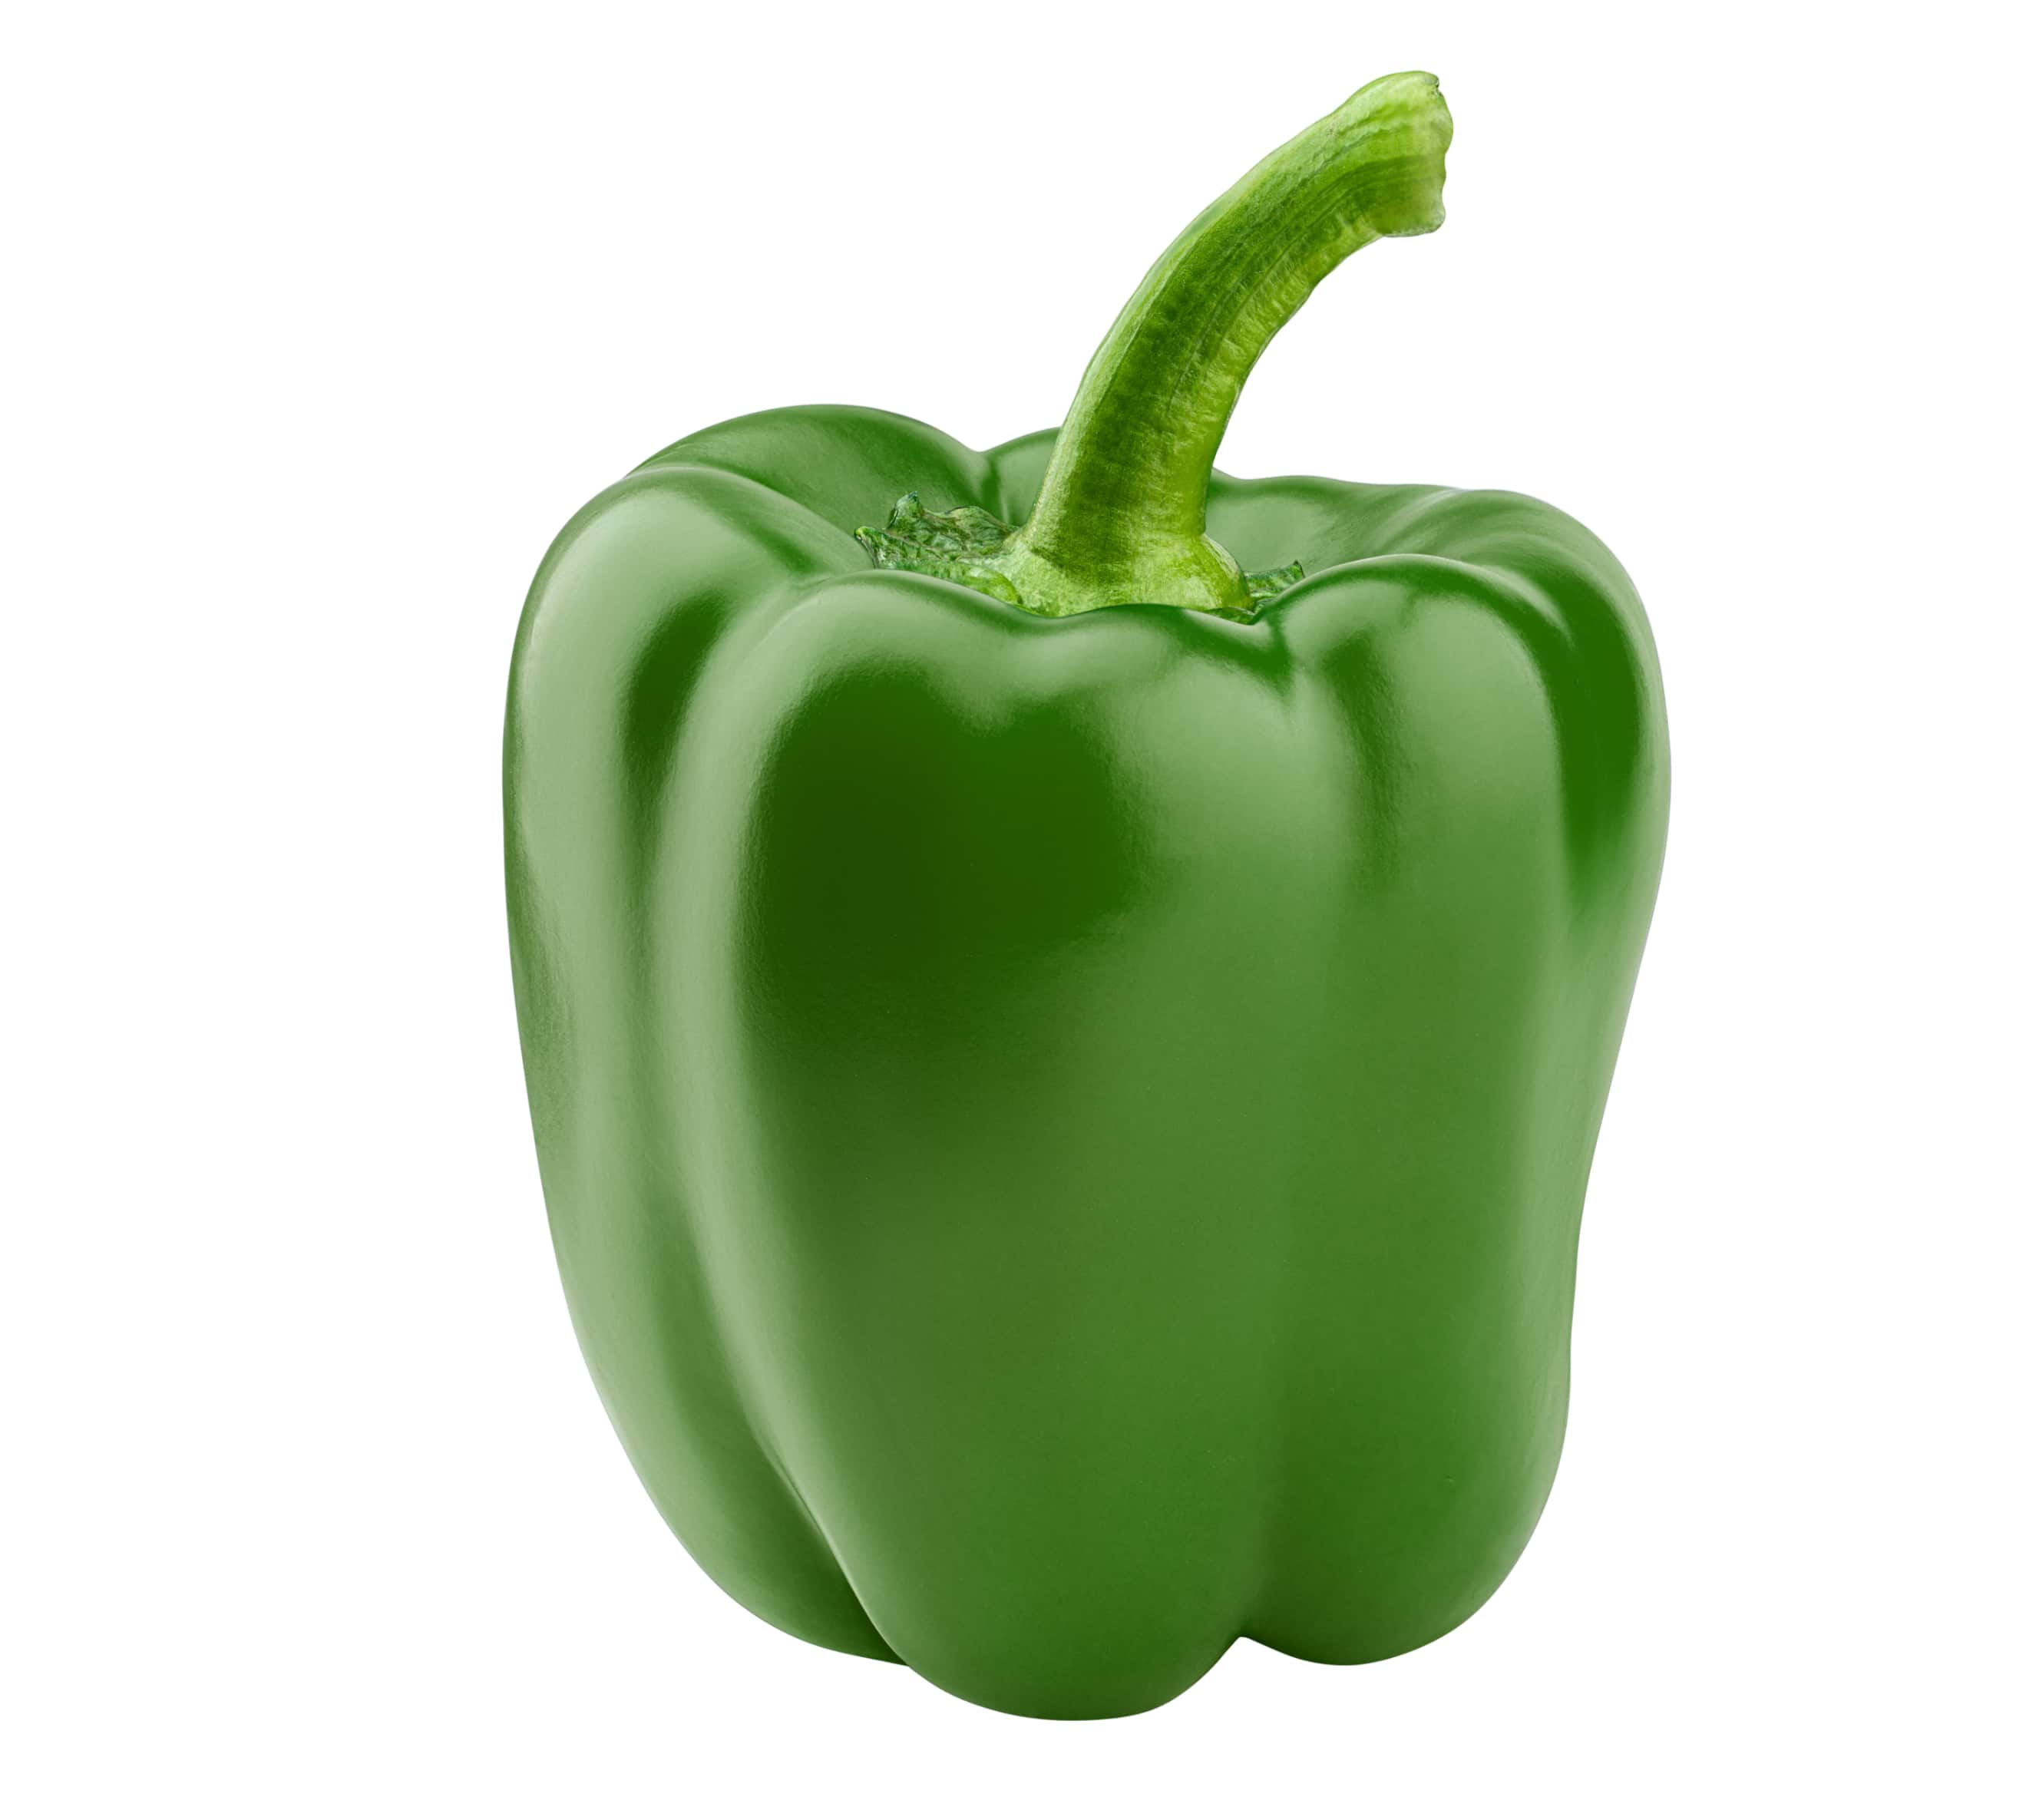 Maximize Your Harvest with Max Bell Sweet Pepper from Royal Seed. Grow maxibell Peppers with Superior Flavor and Size. Shop Seeds Today!